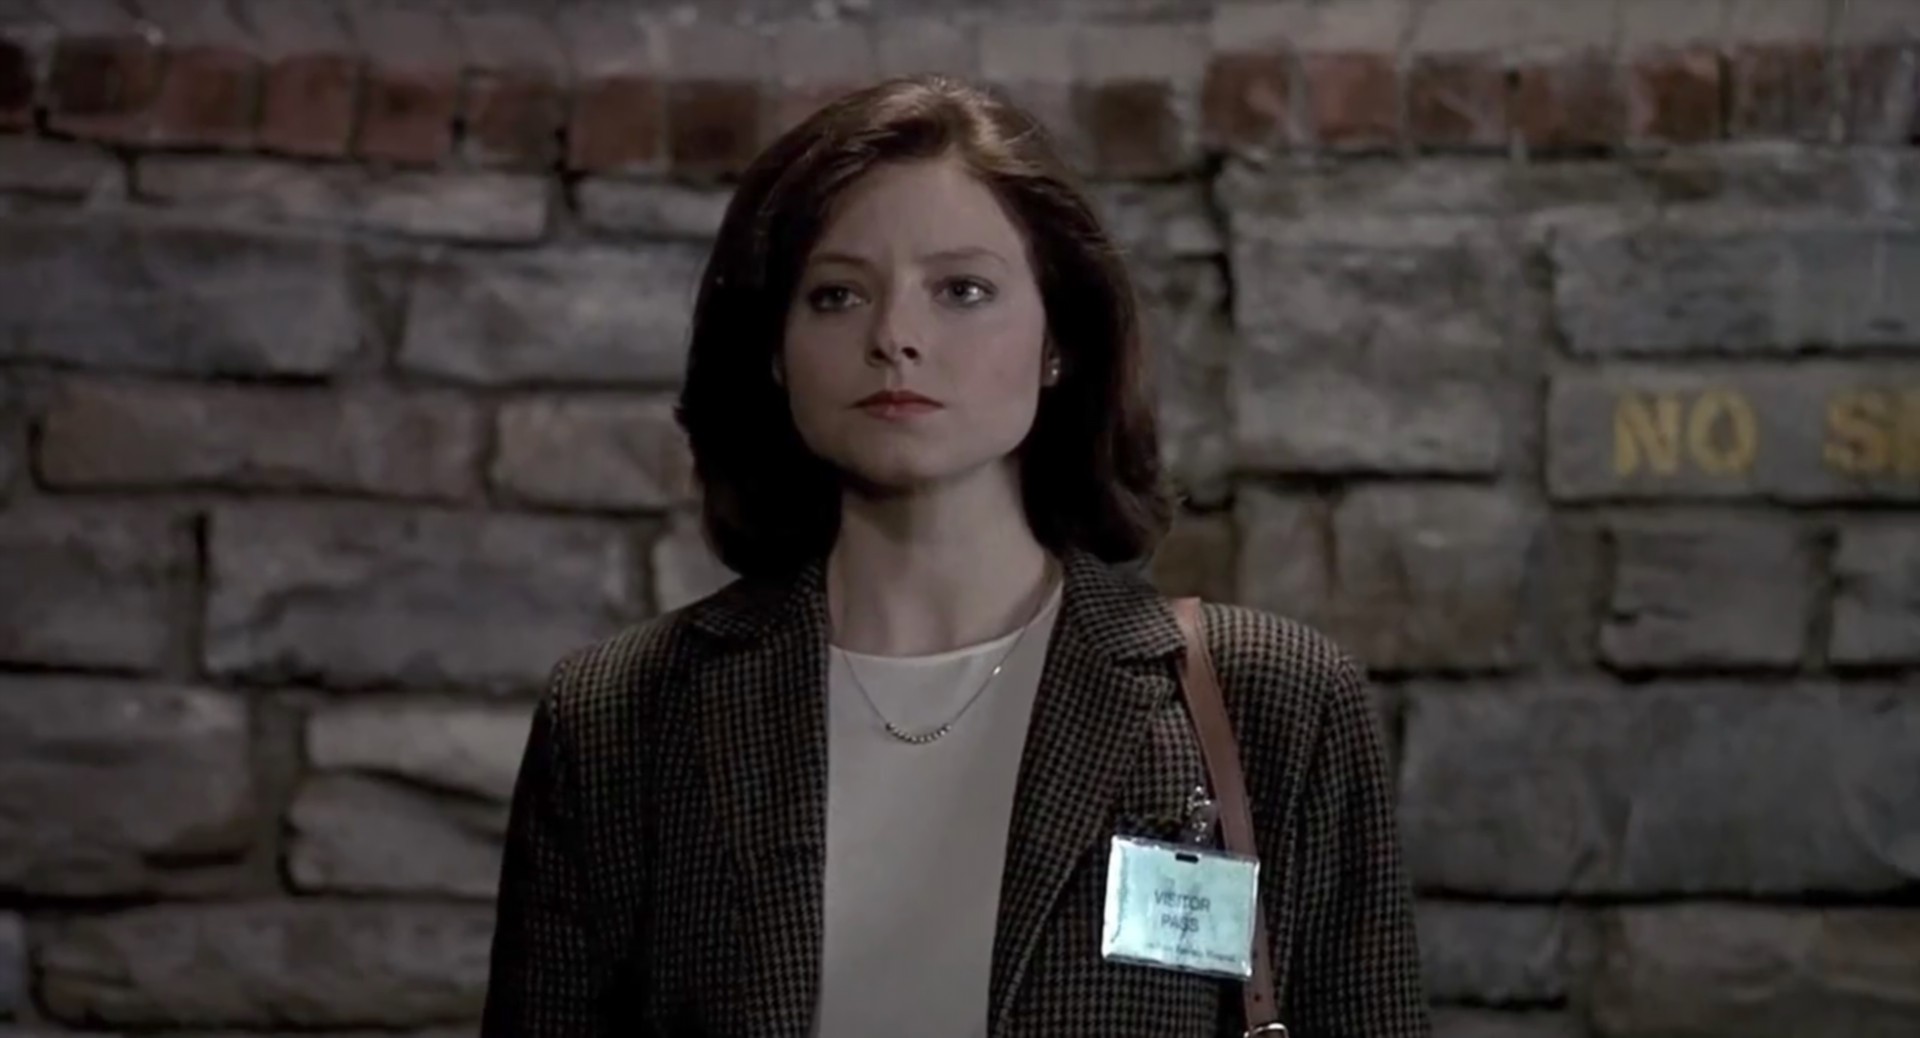 jodie-foster-as-clarice-starling-in-the-silence.jpg